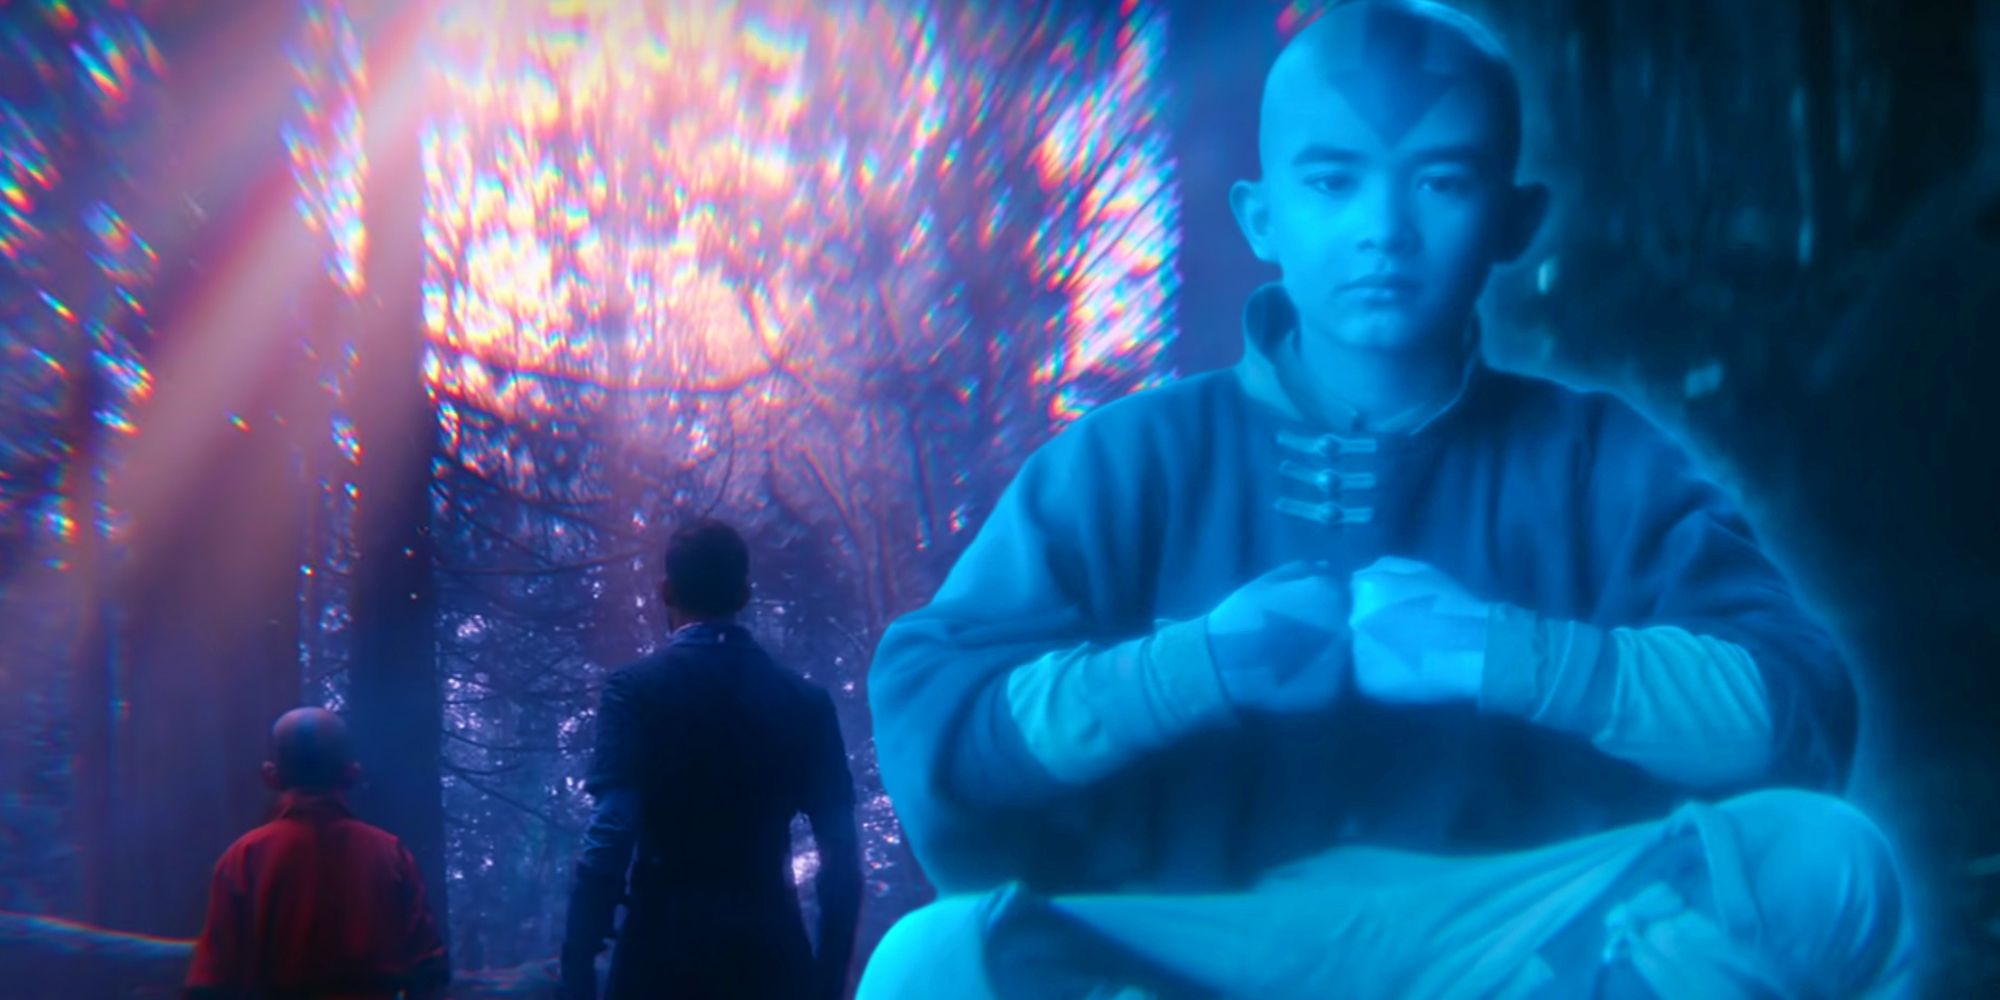 Aang in Spirit form next to Sokka in the Spirit World in Netflix's Avatar: The Last Airbender